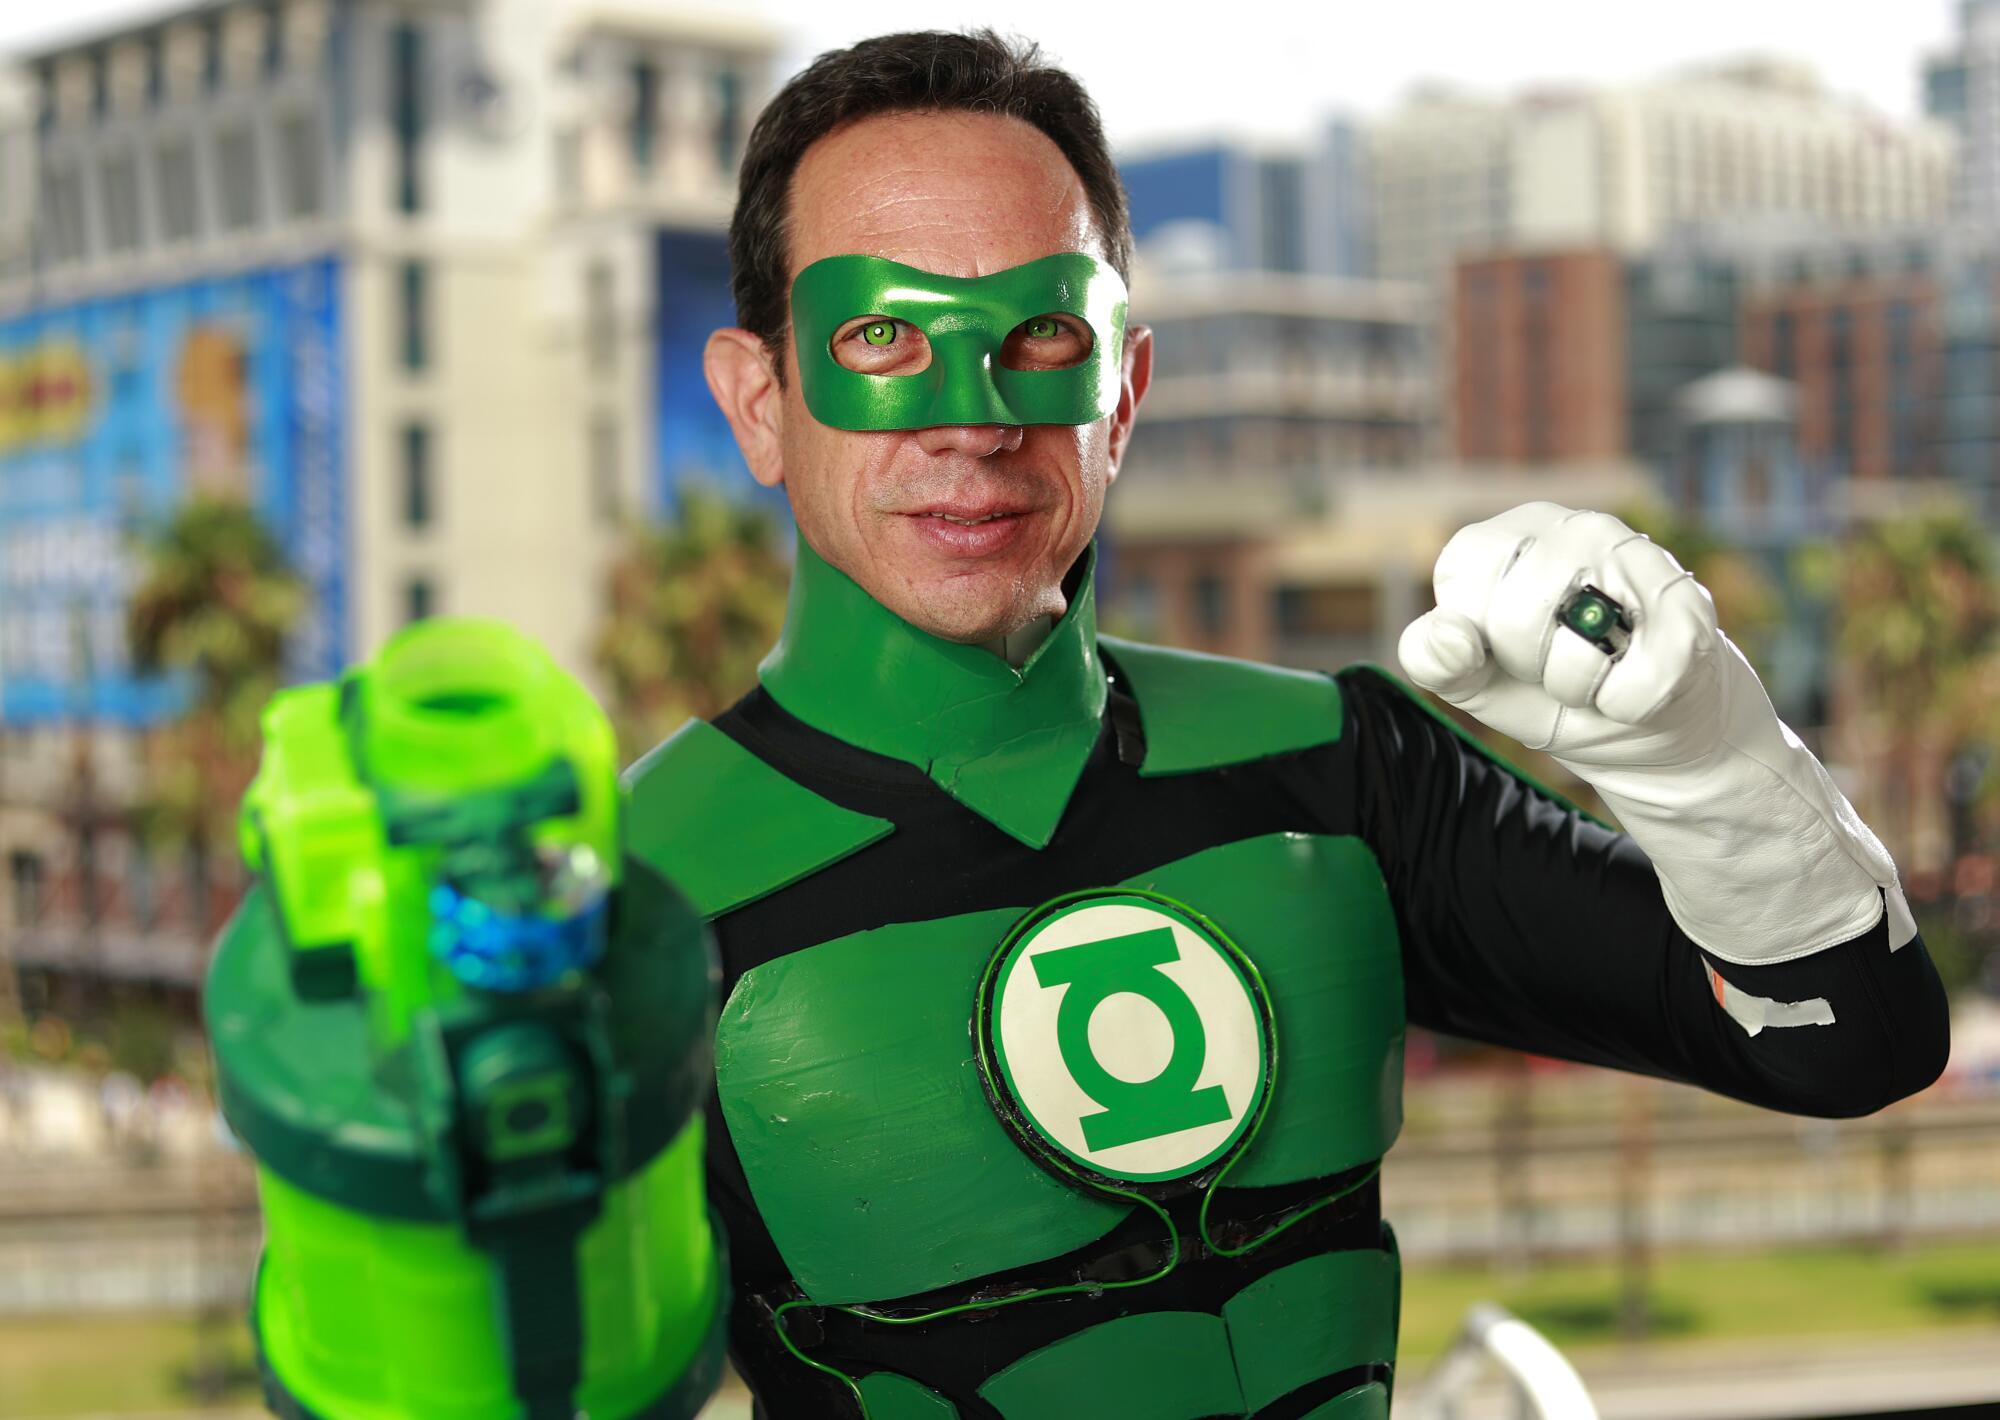 Jeffery Rose of Los Angeles dressed as the Green Lantern at Comic-Con.